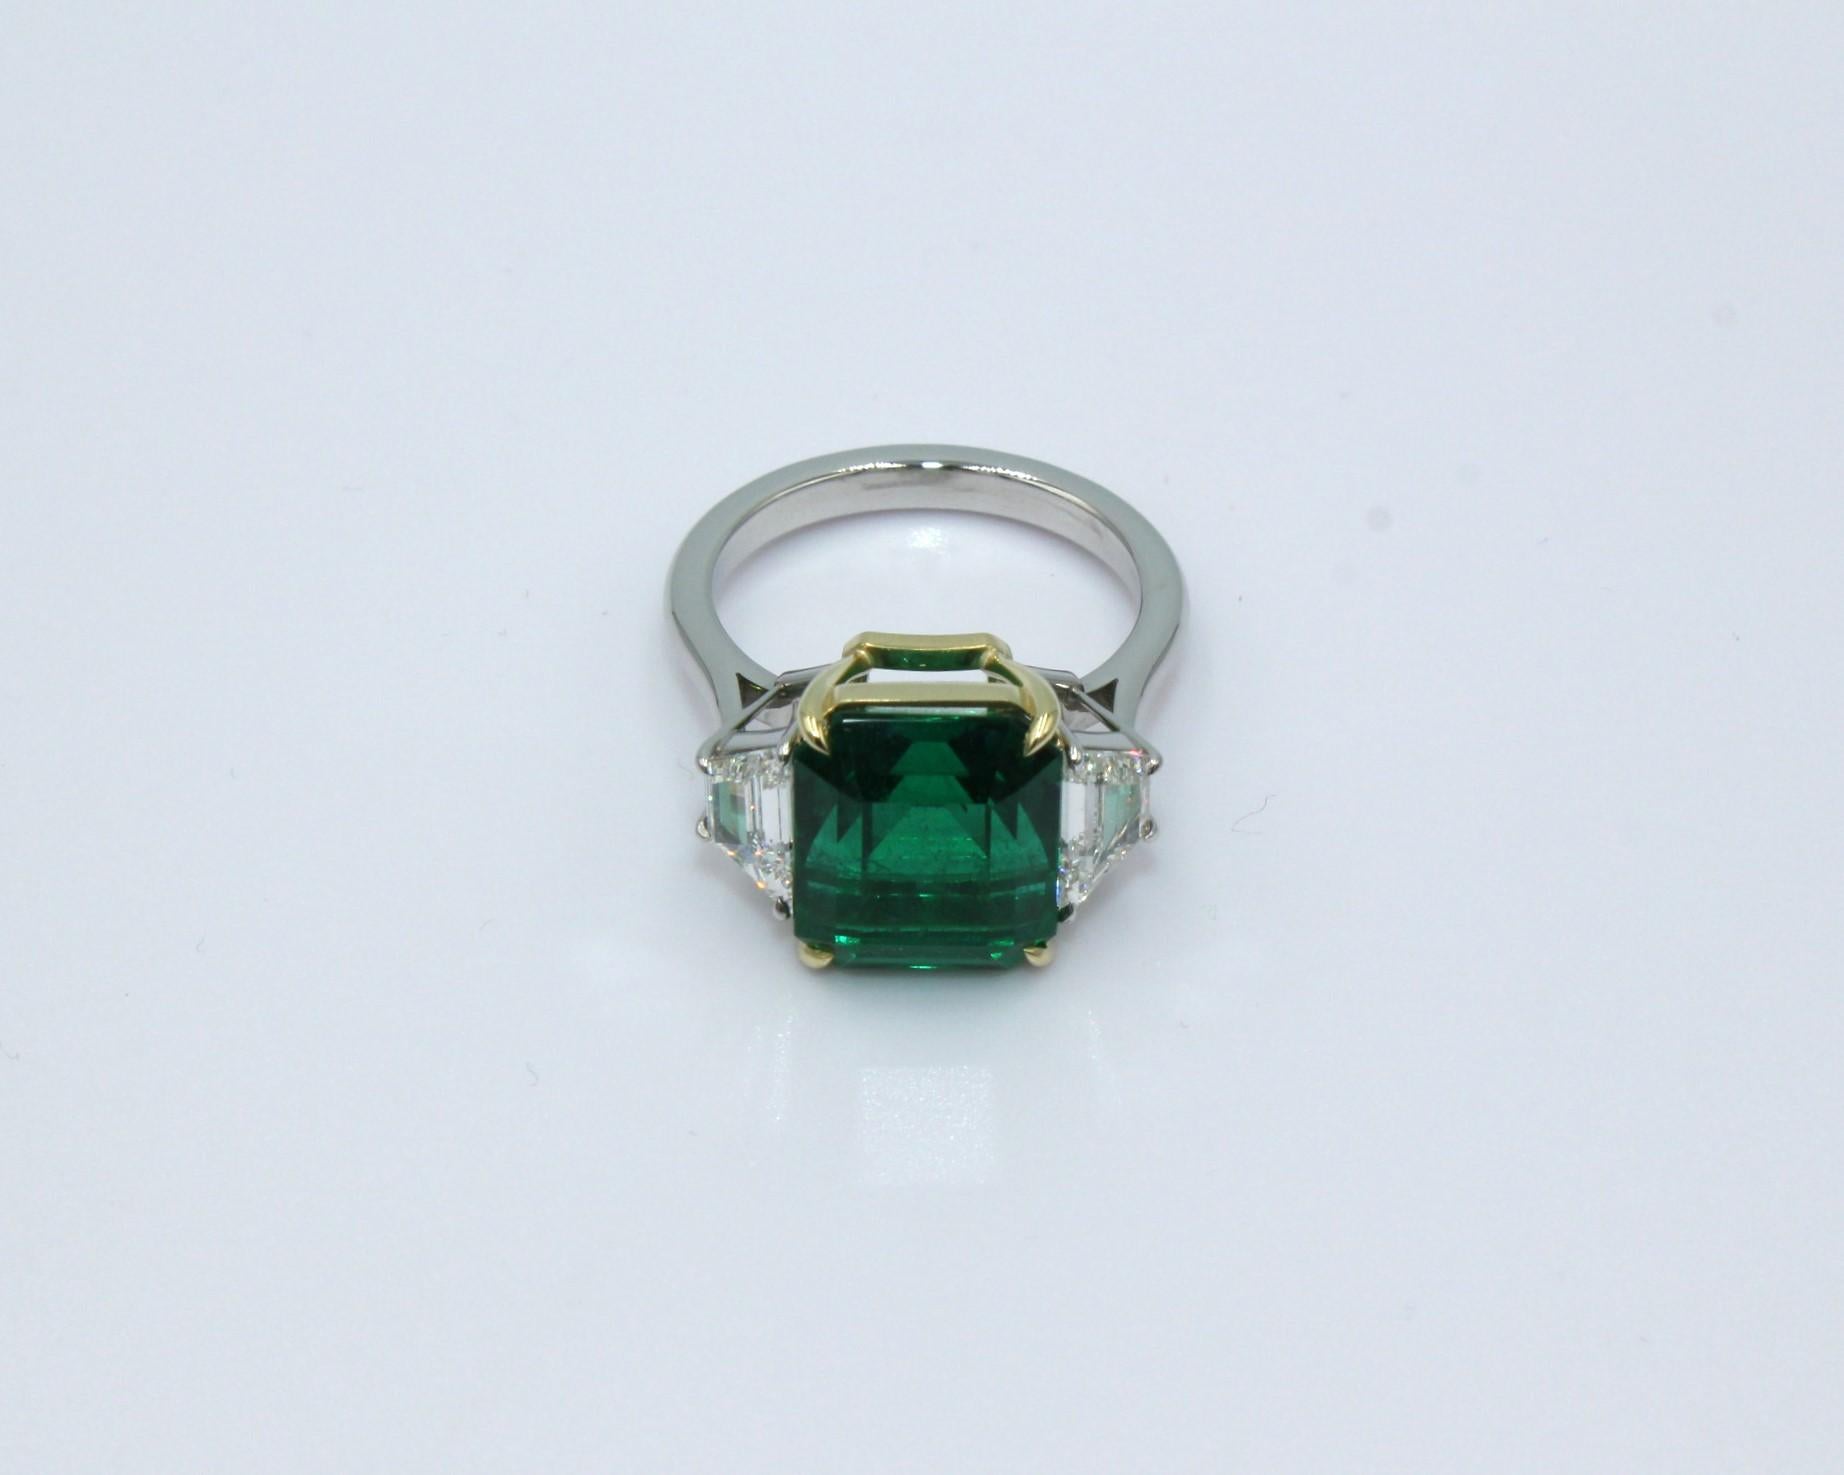 6.75 carat emerald-cut Zambian Emerald with 2 trapezoid shaped diamonds, totaling a diamond weight of 1.06 carat. 

This stunning Emerald & Diamond Ring will highlight your elegance and uniqueness. 

Item Details:
- Type: Ring
- Metal: 18K Gold &